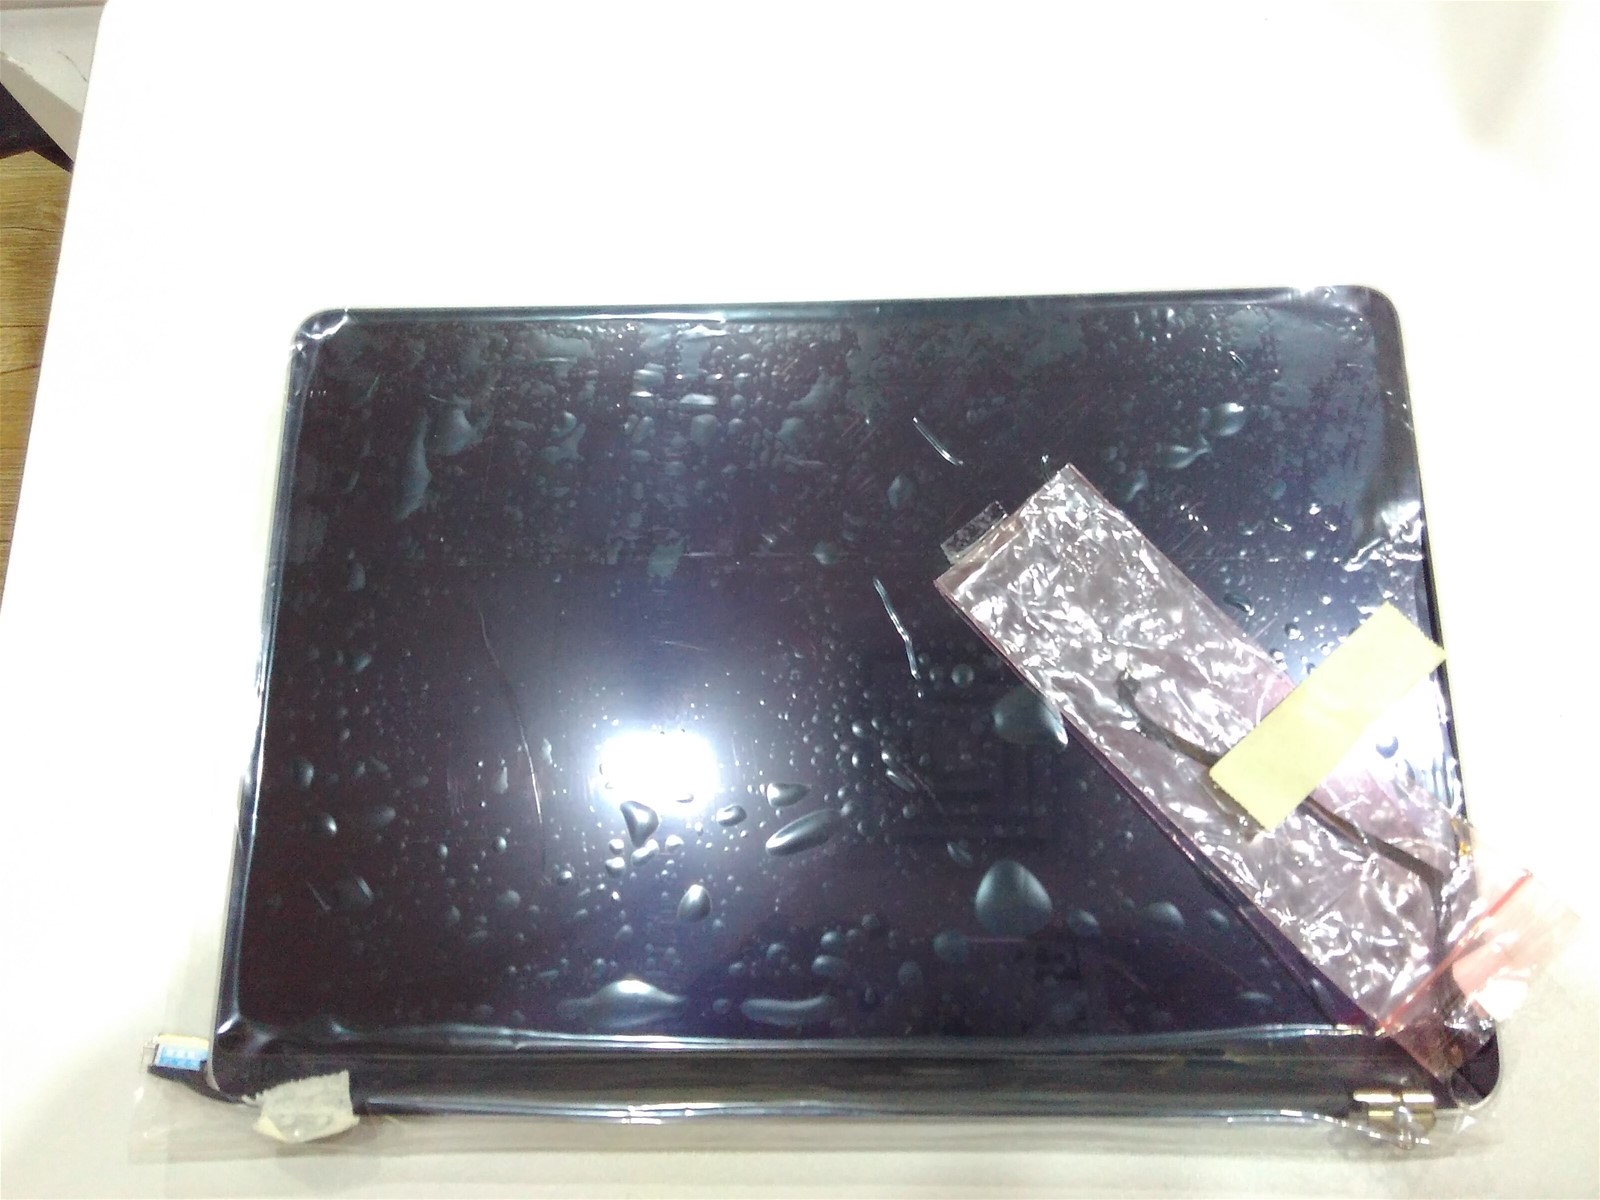 New Full LCD Screen Assembly For Macbook Pro 13